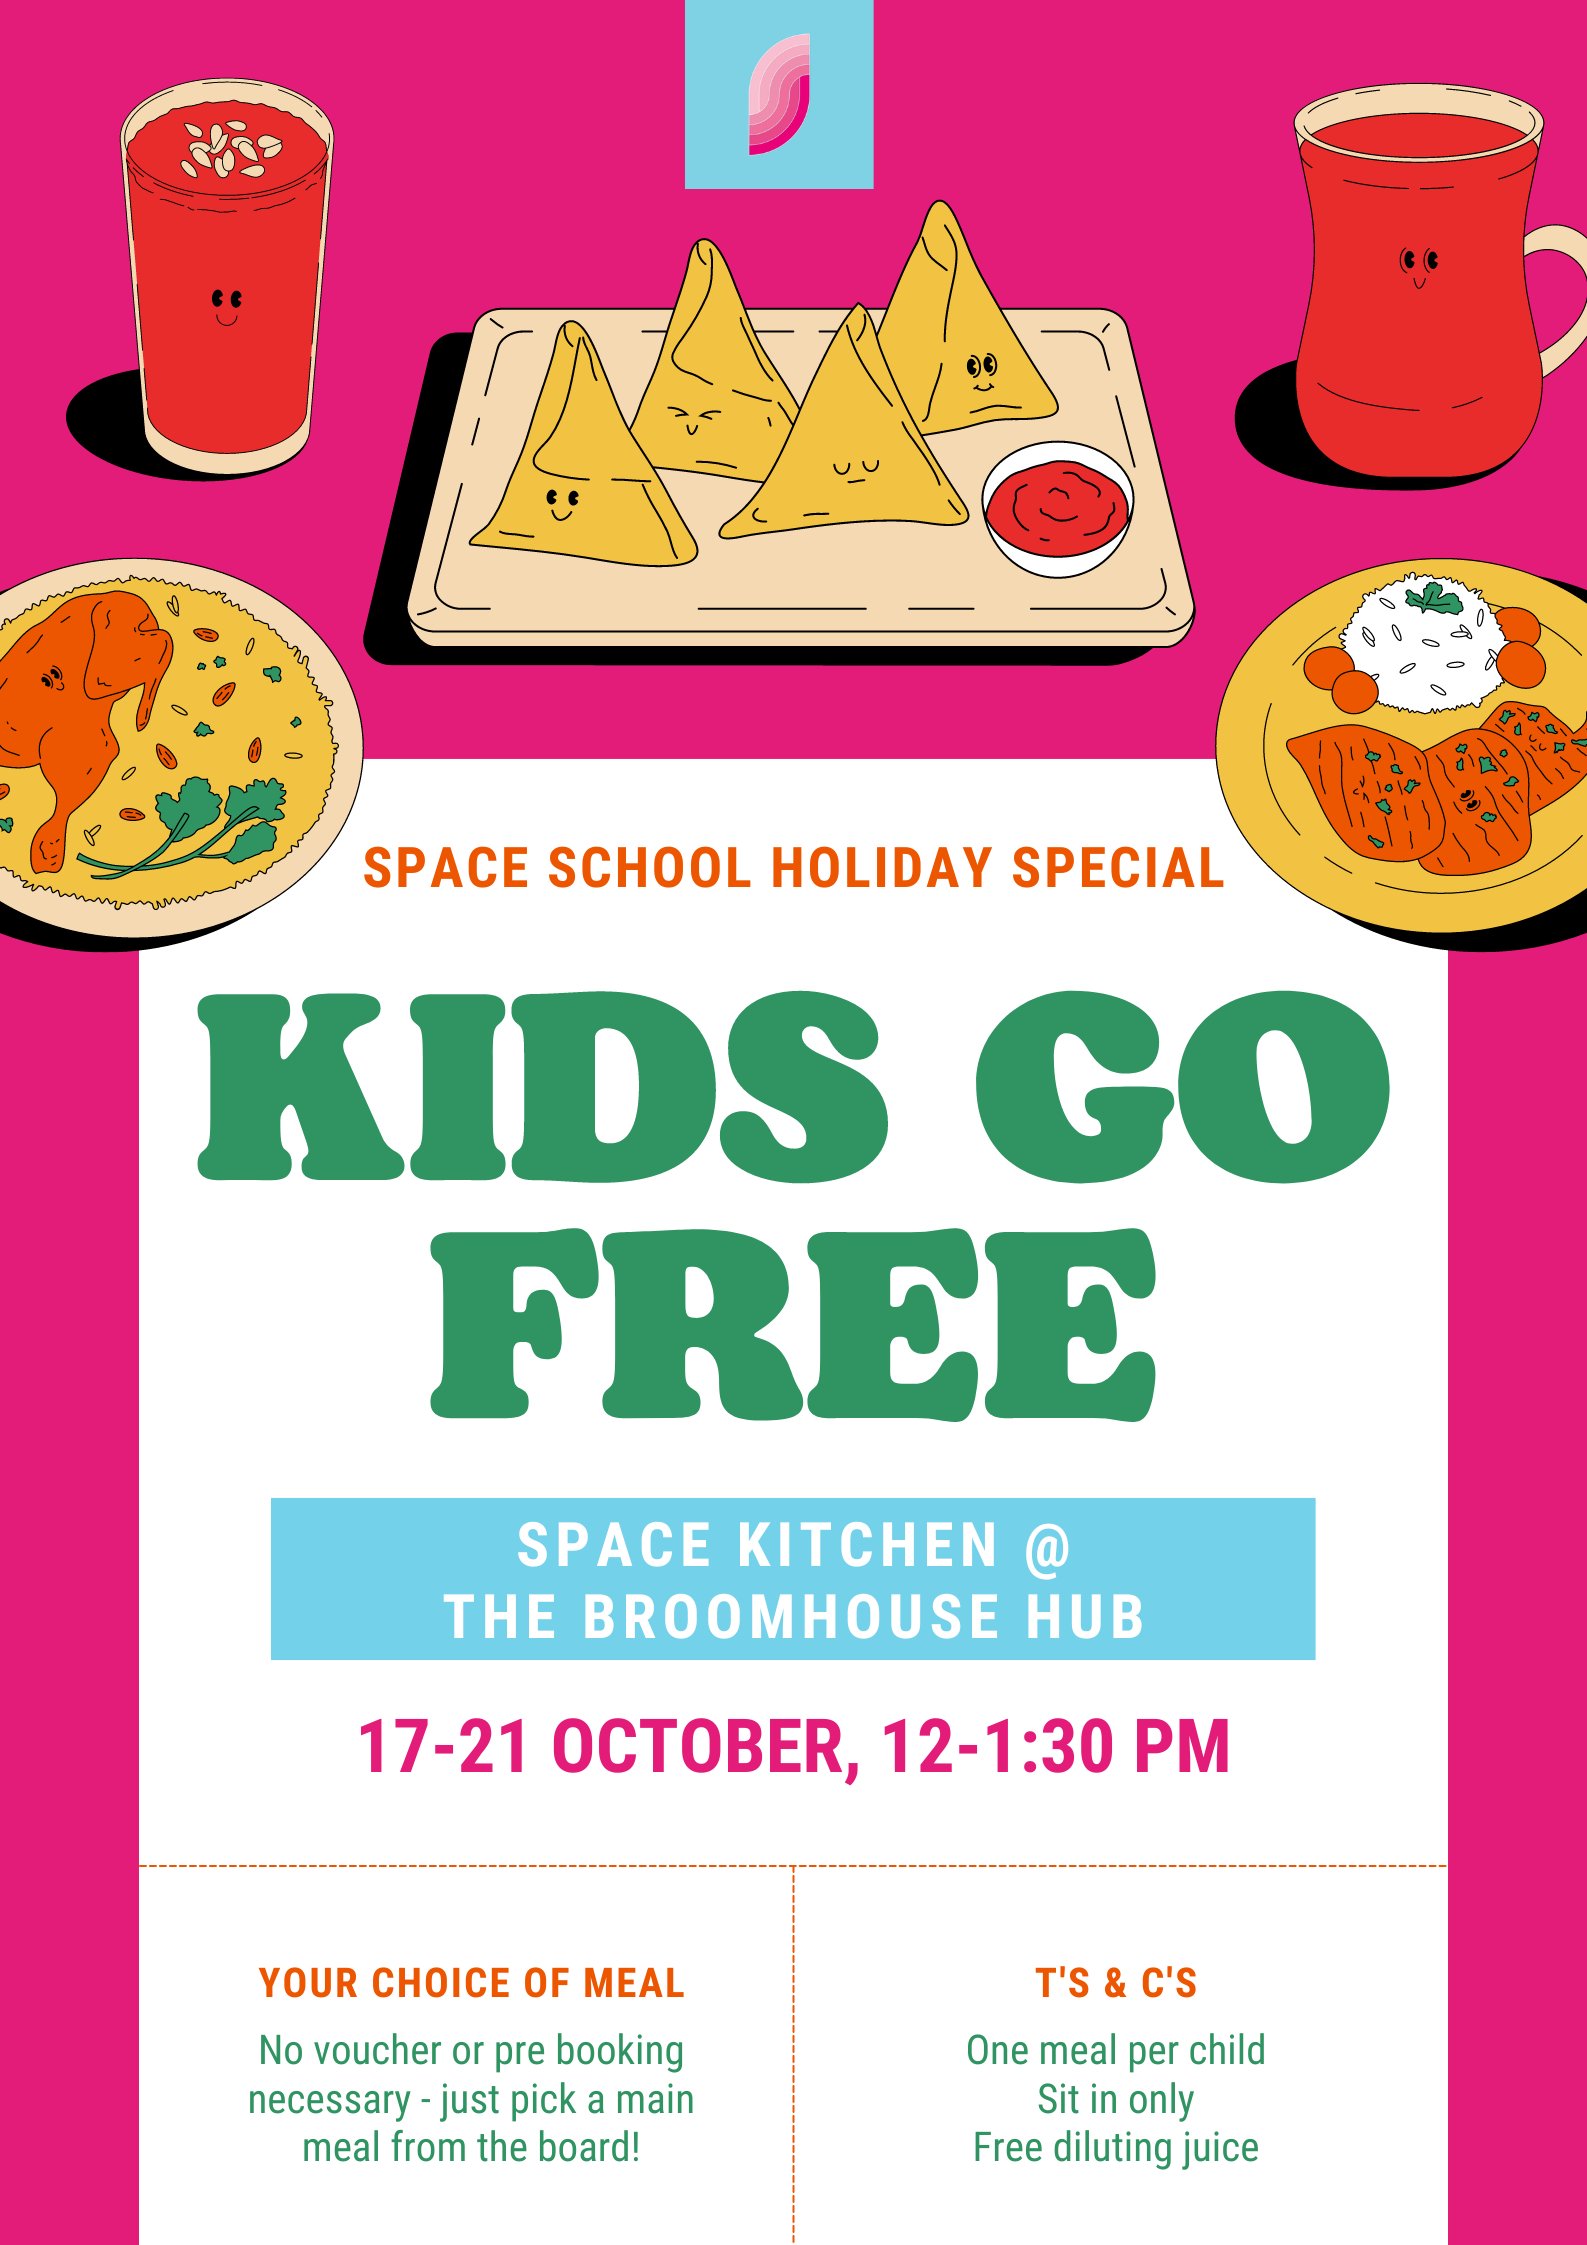 Space Broomhouse Kids Go Free Poster Featured Image